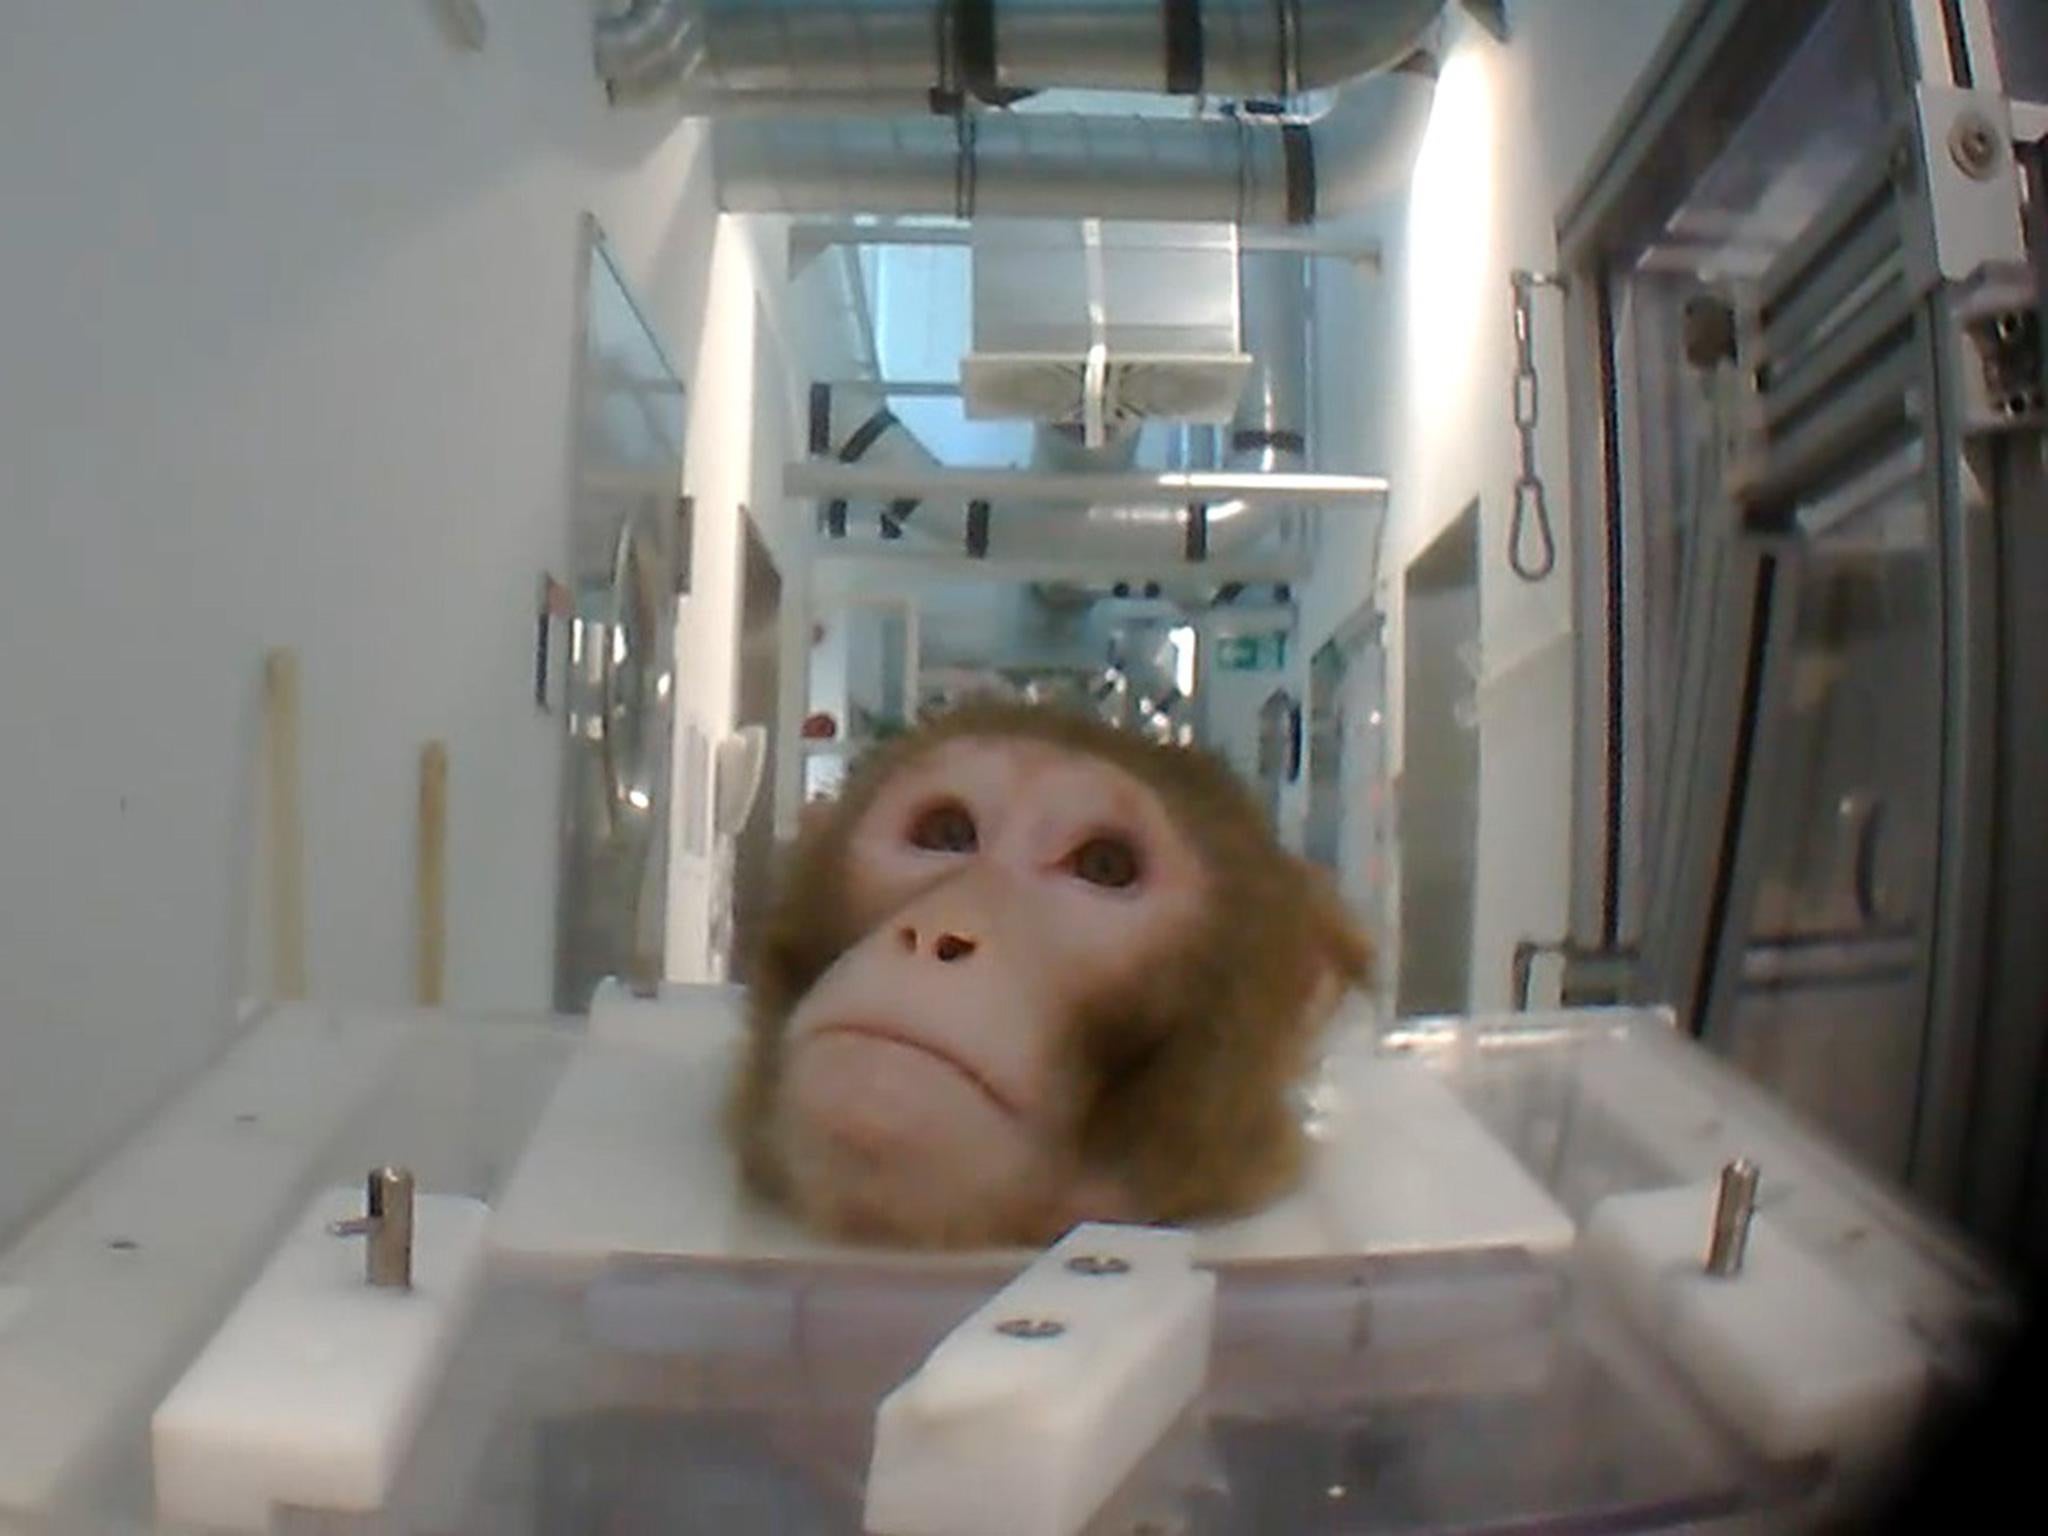 The Home Office says there are ‘no plans’ to ban the use of non-human primates in research